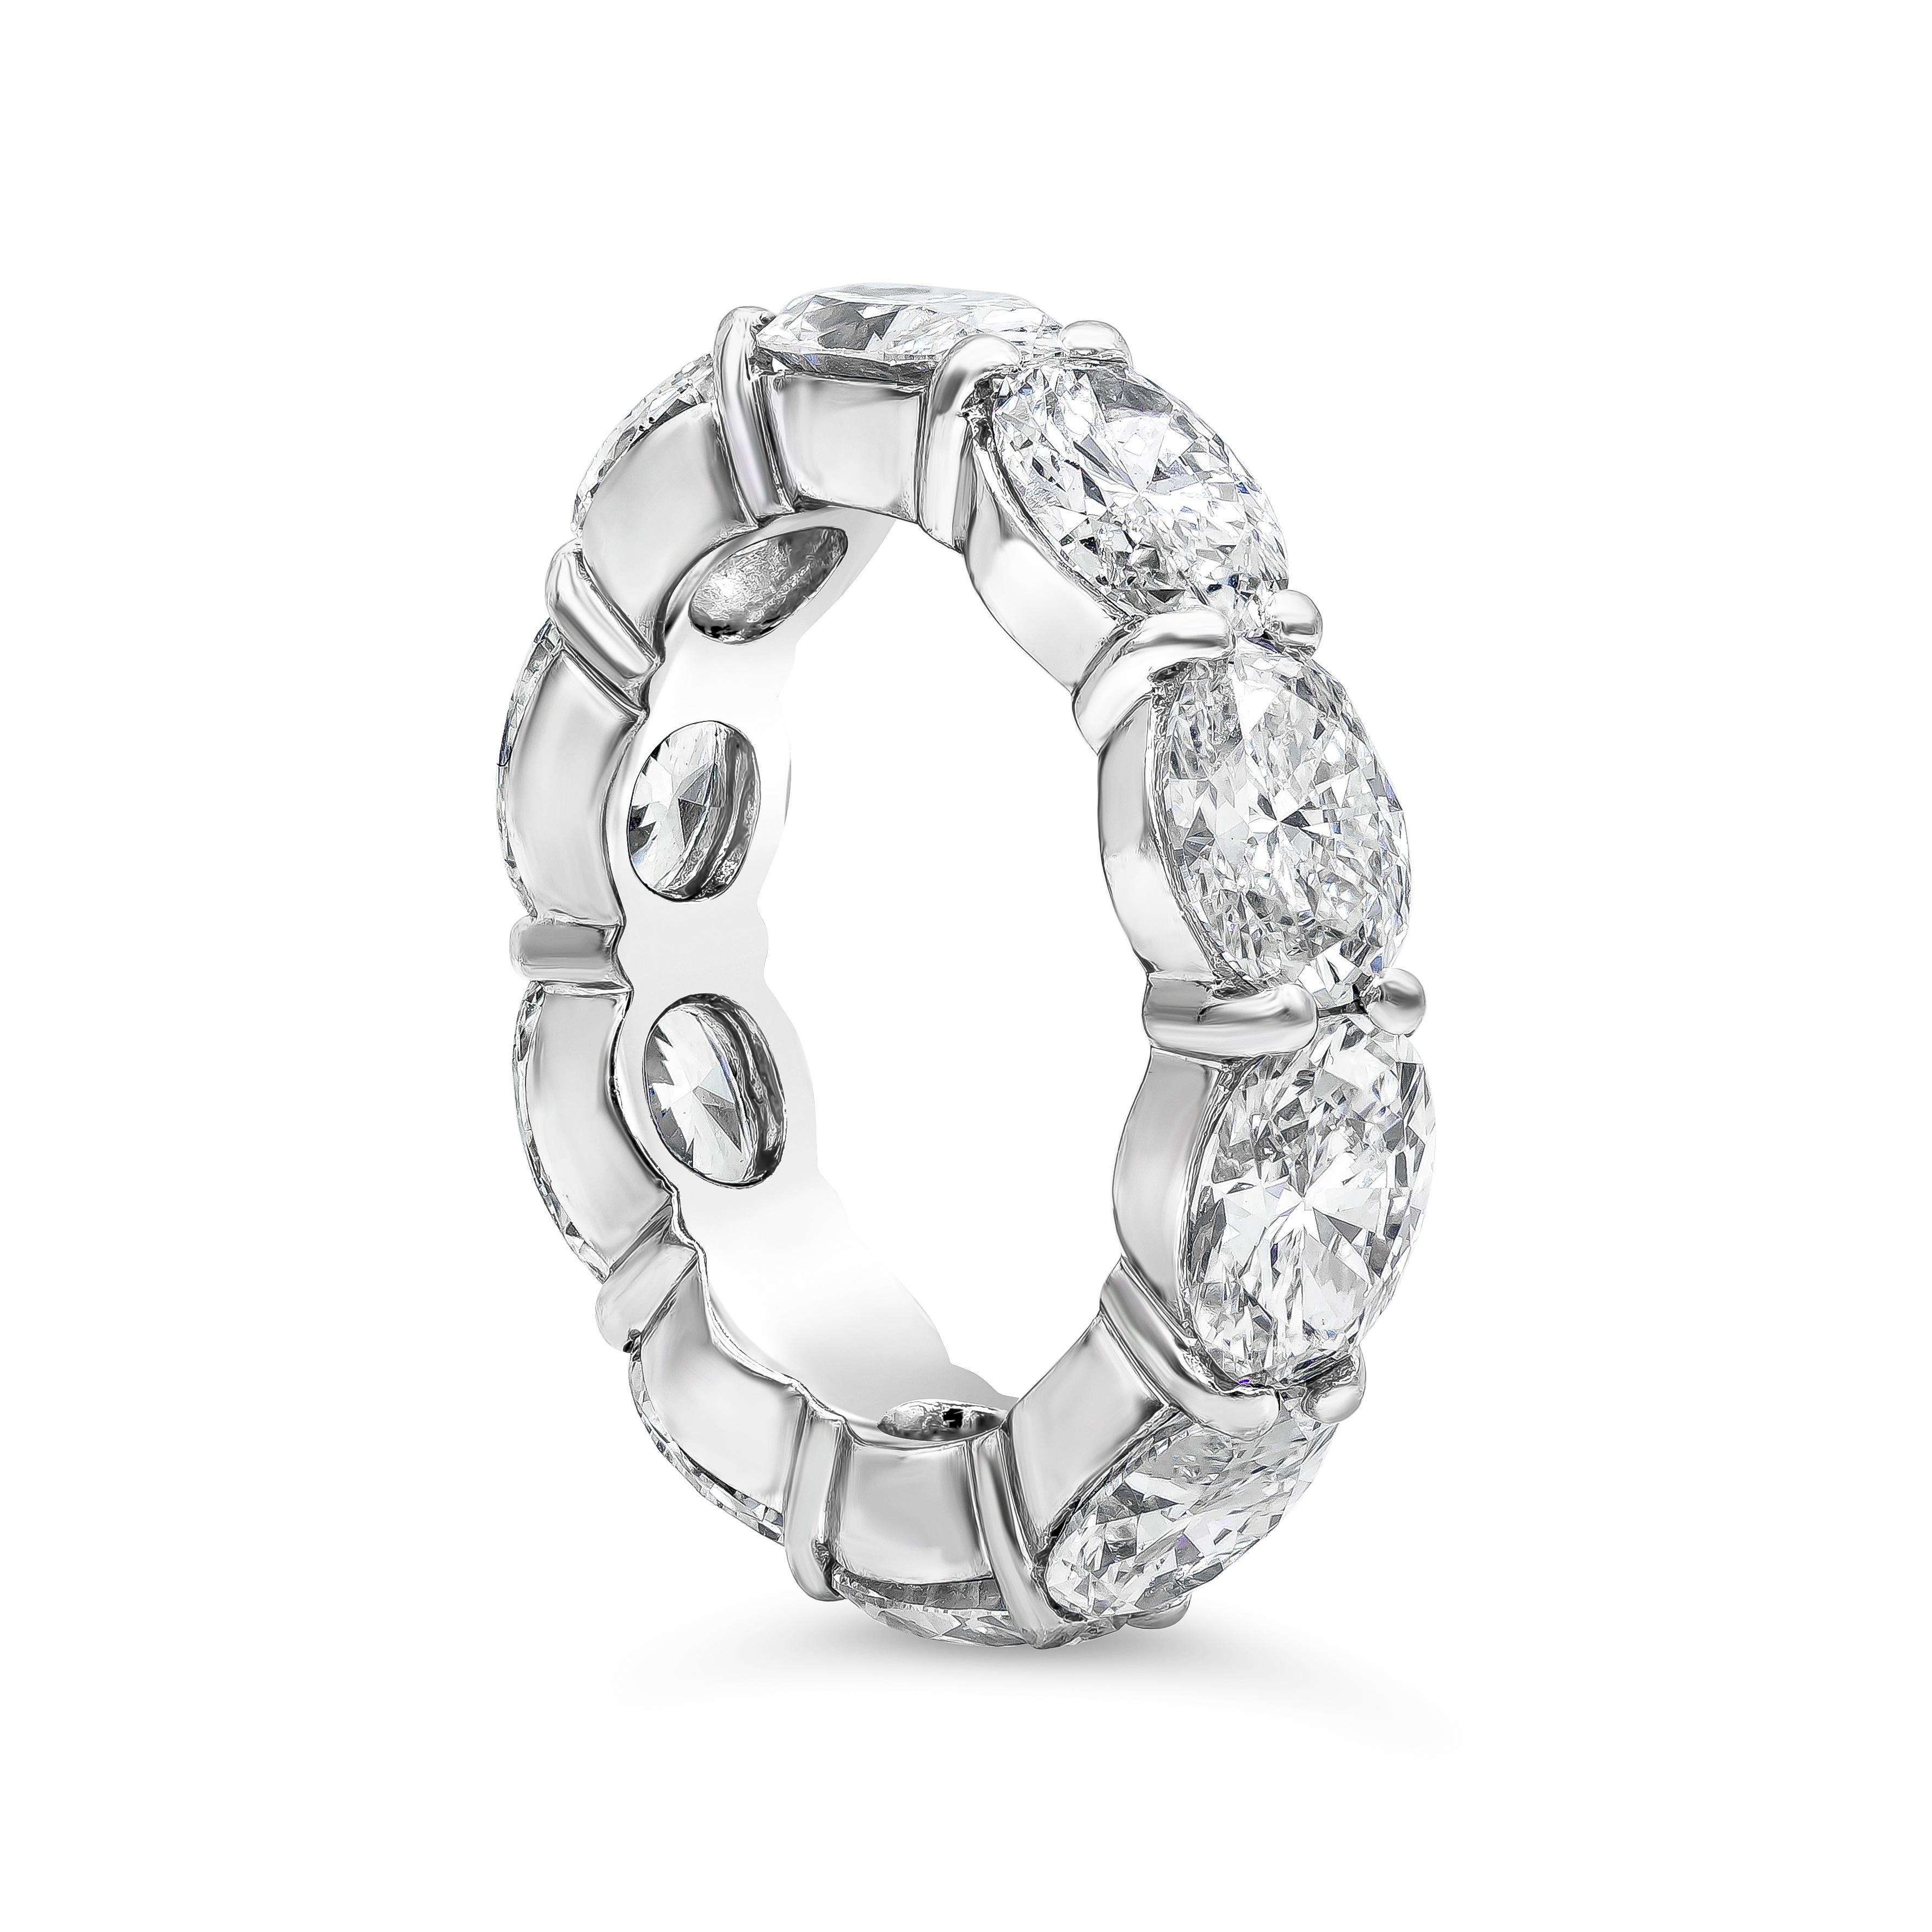 A very fashionable wedding band style showcasing a row of brilliant oval cut diamonds weighing 7.40 carats total, set in a non-traditional east-west (horizontal) design made in platinum. Size 6.5 US.

Roman Malakov is a custom house, specializing in